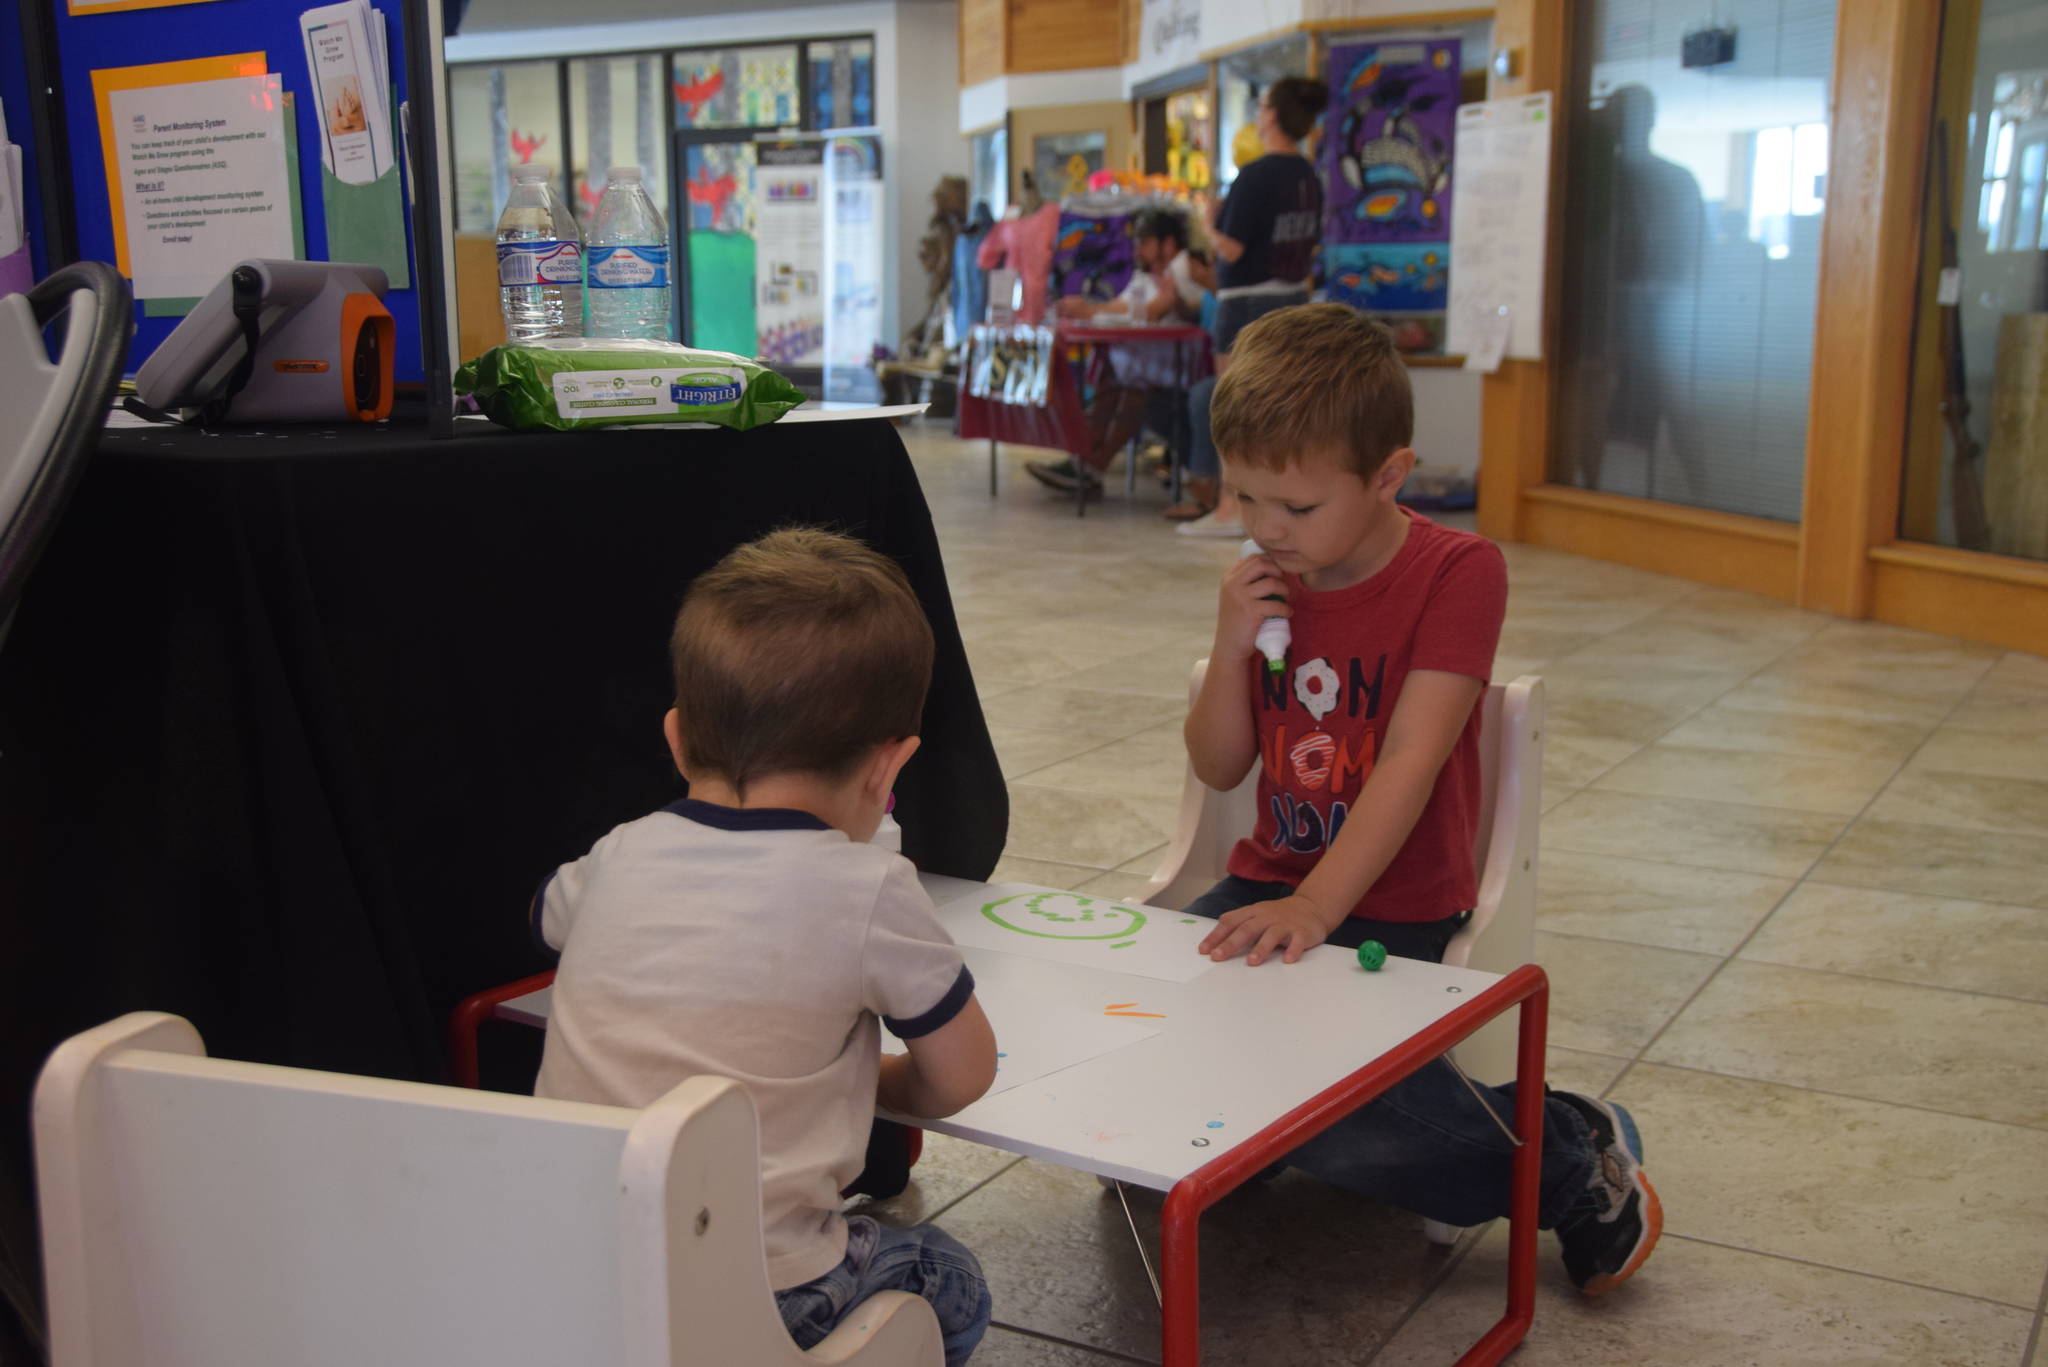 Mason Clark, left, and Bridger Clark, right, practice their art skills at the Frontier Community Services booth during KidFest at the Peninsula Center Mall in Soldotna, Alaska on Aug. 10, 2019. (Photo by Brian Mazurek/Peninsula Clarion)